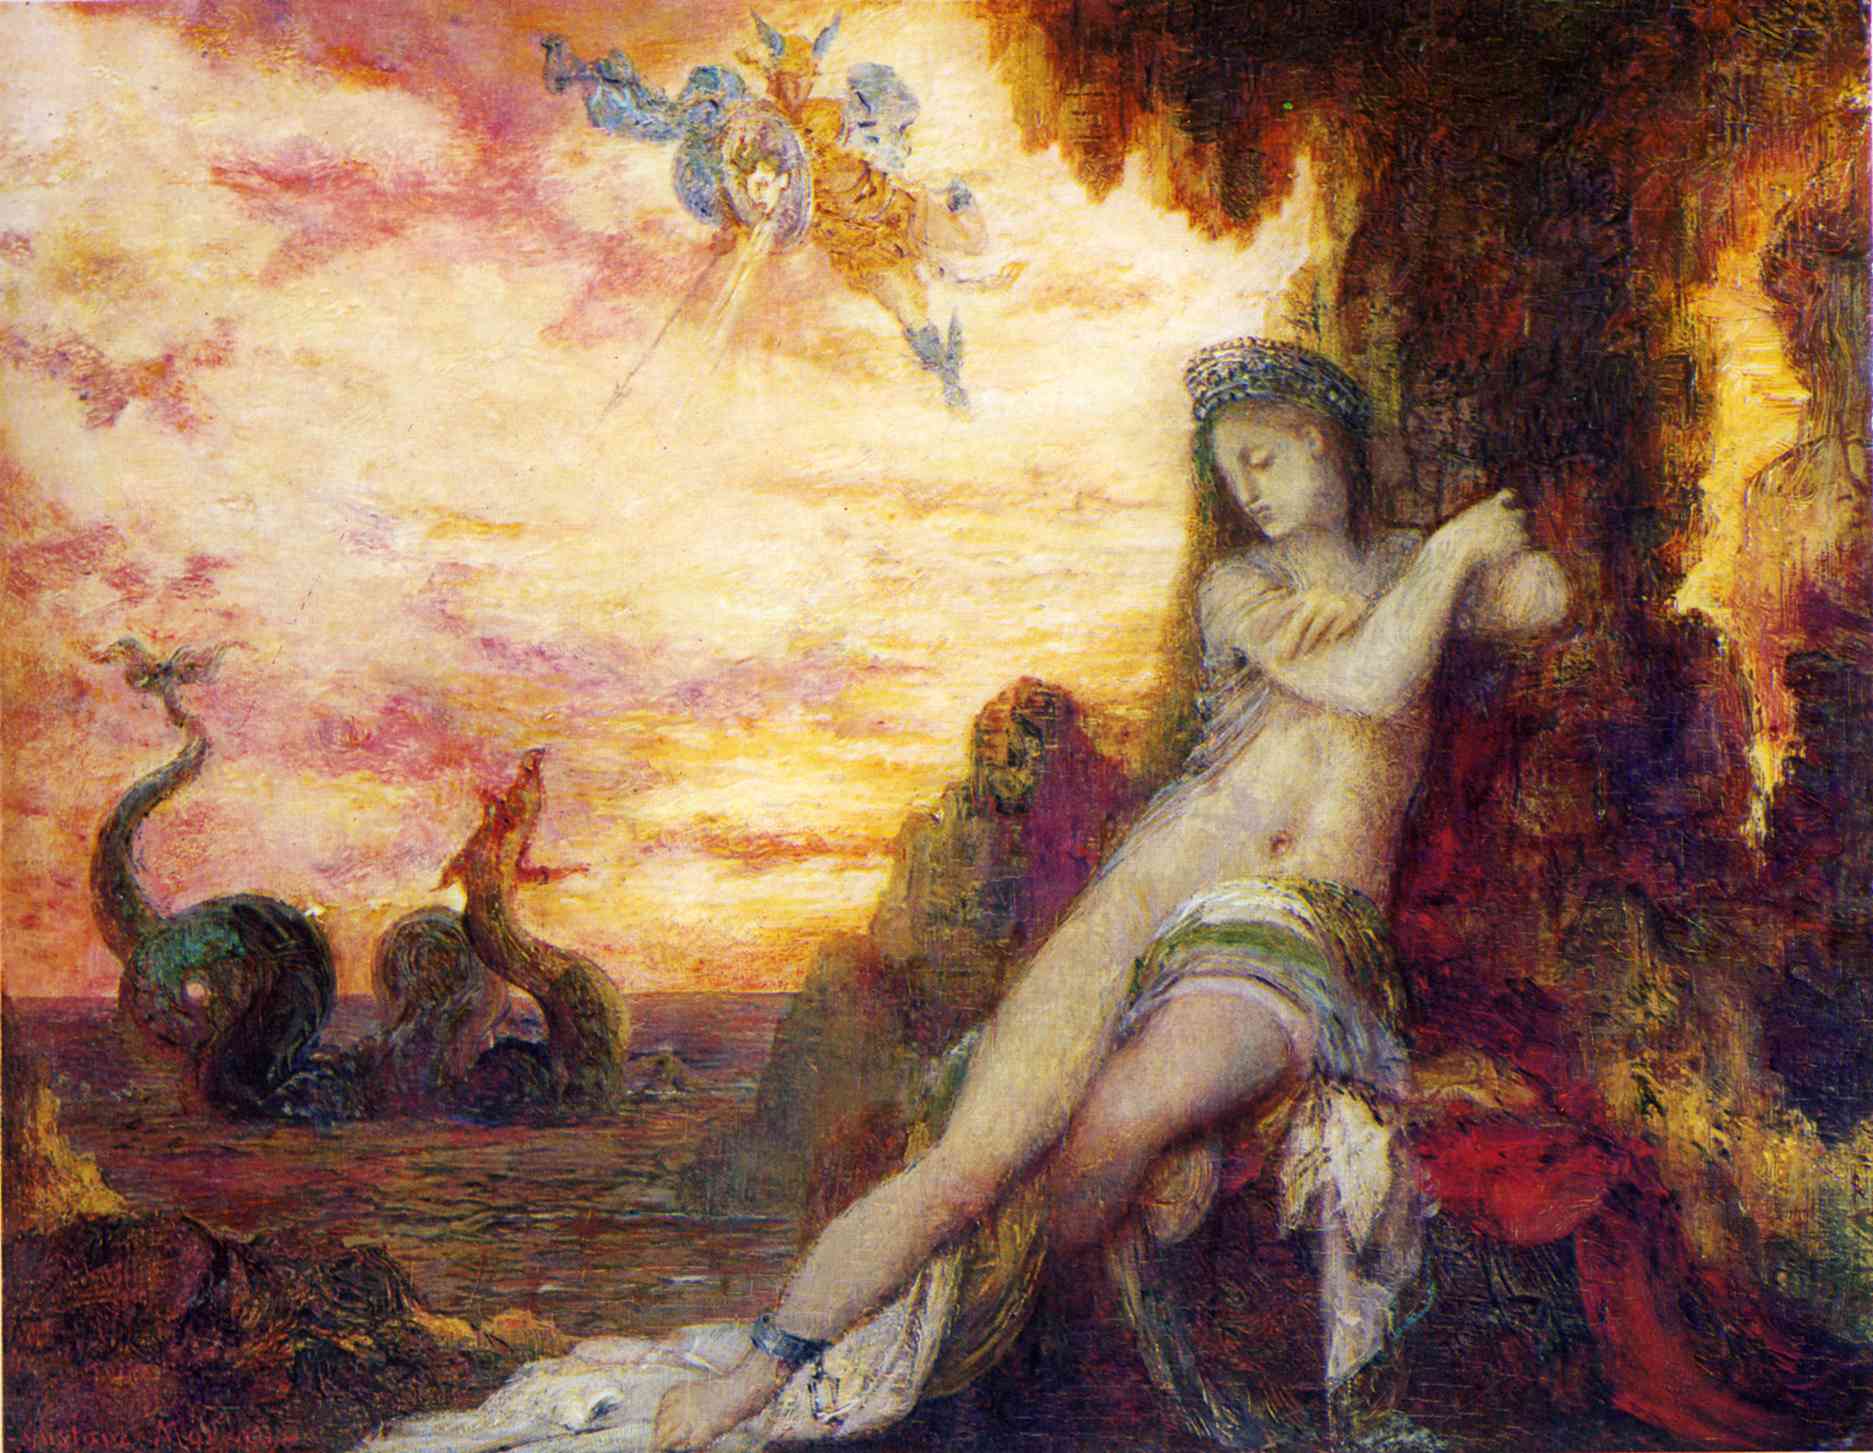 Perseus and Andromeda by Gustave Moreau - c. 1870 - 20 x 25.4 cm private collection